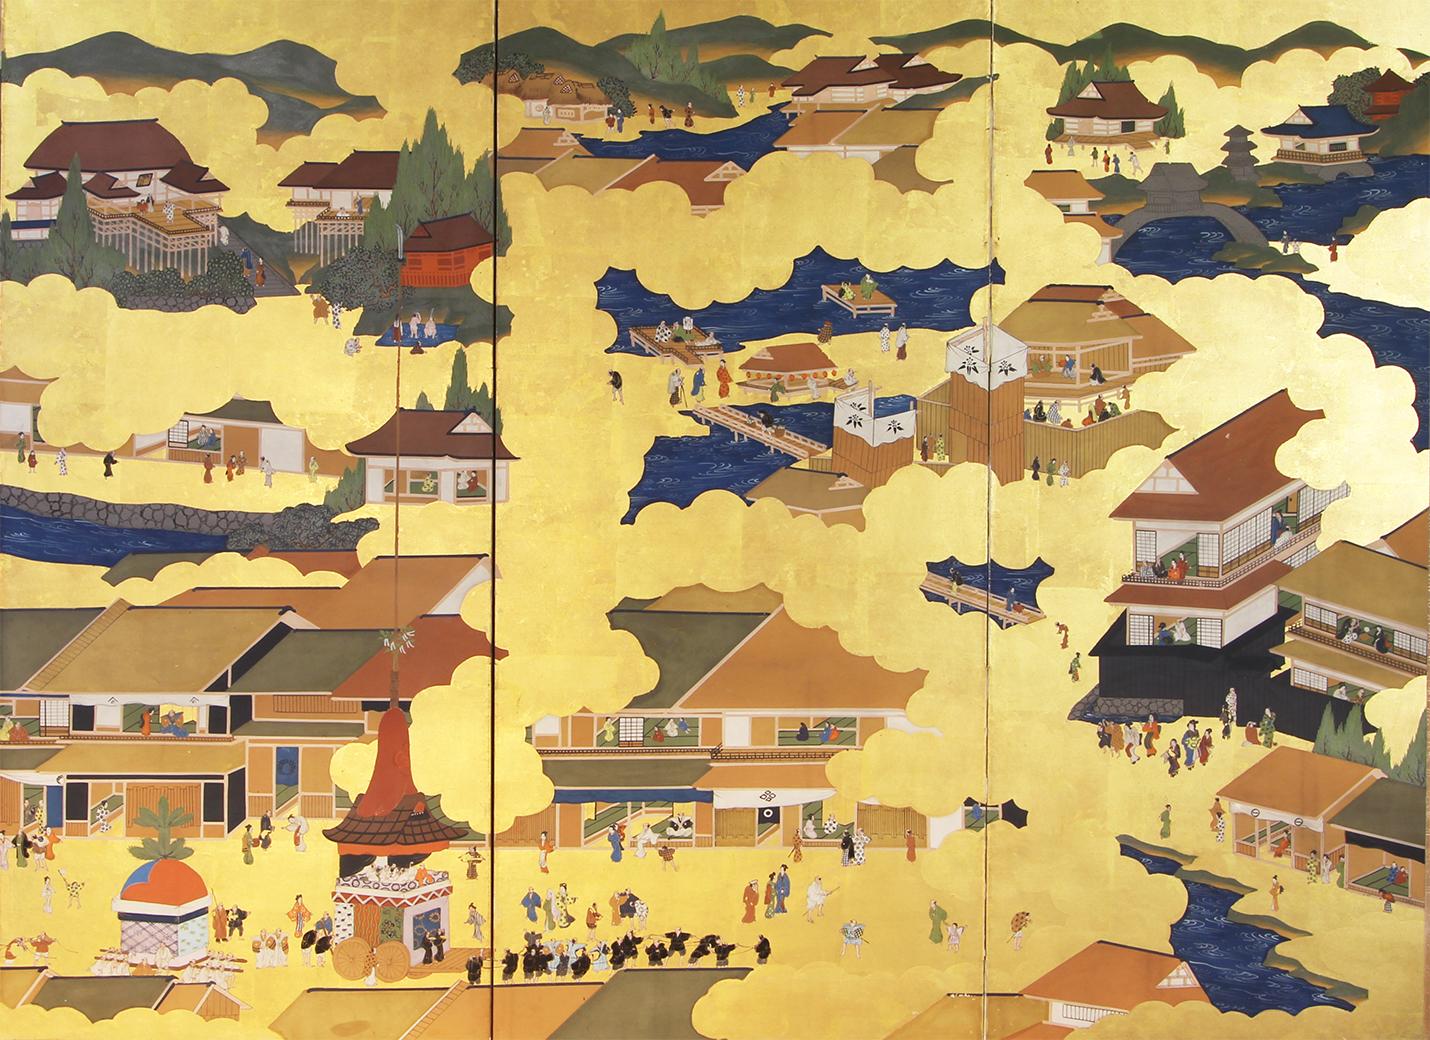 Kyoto ancient city landscape with Kamo river and Gion district.
Beautiful six panel screen painted with mineral pigments on rice paper and gold leaf made in the Mejij period.
Screens depicting the ancient capital are among the most popular genres